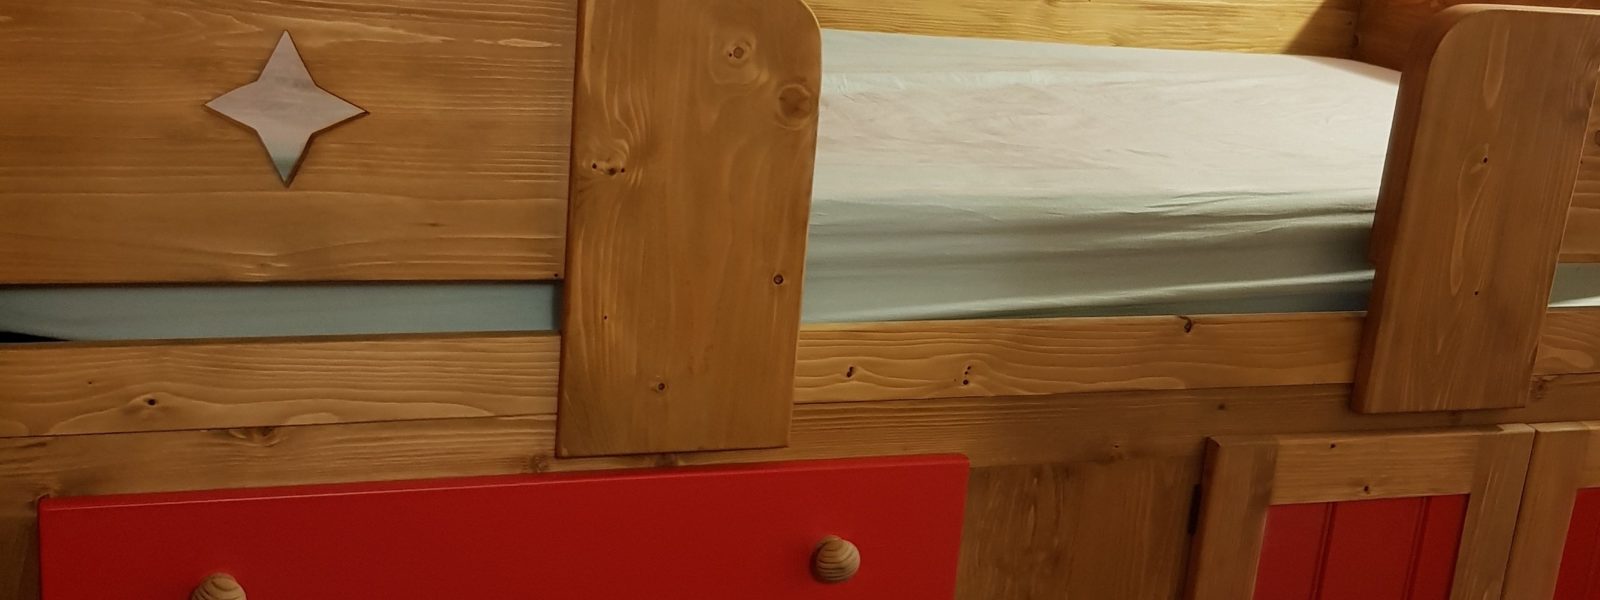 Kids cabin bed painted in red.